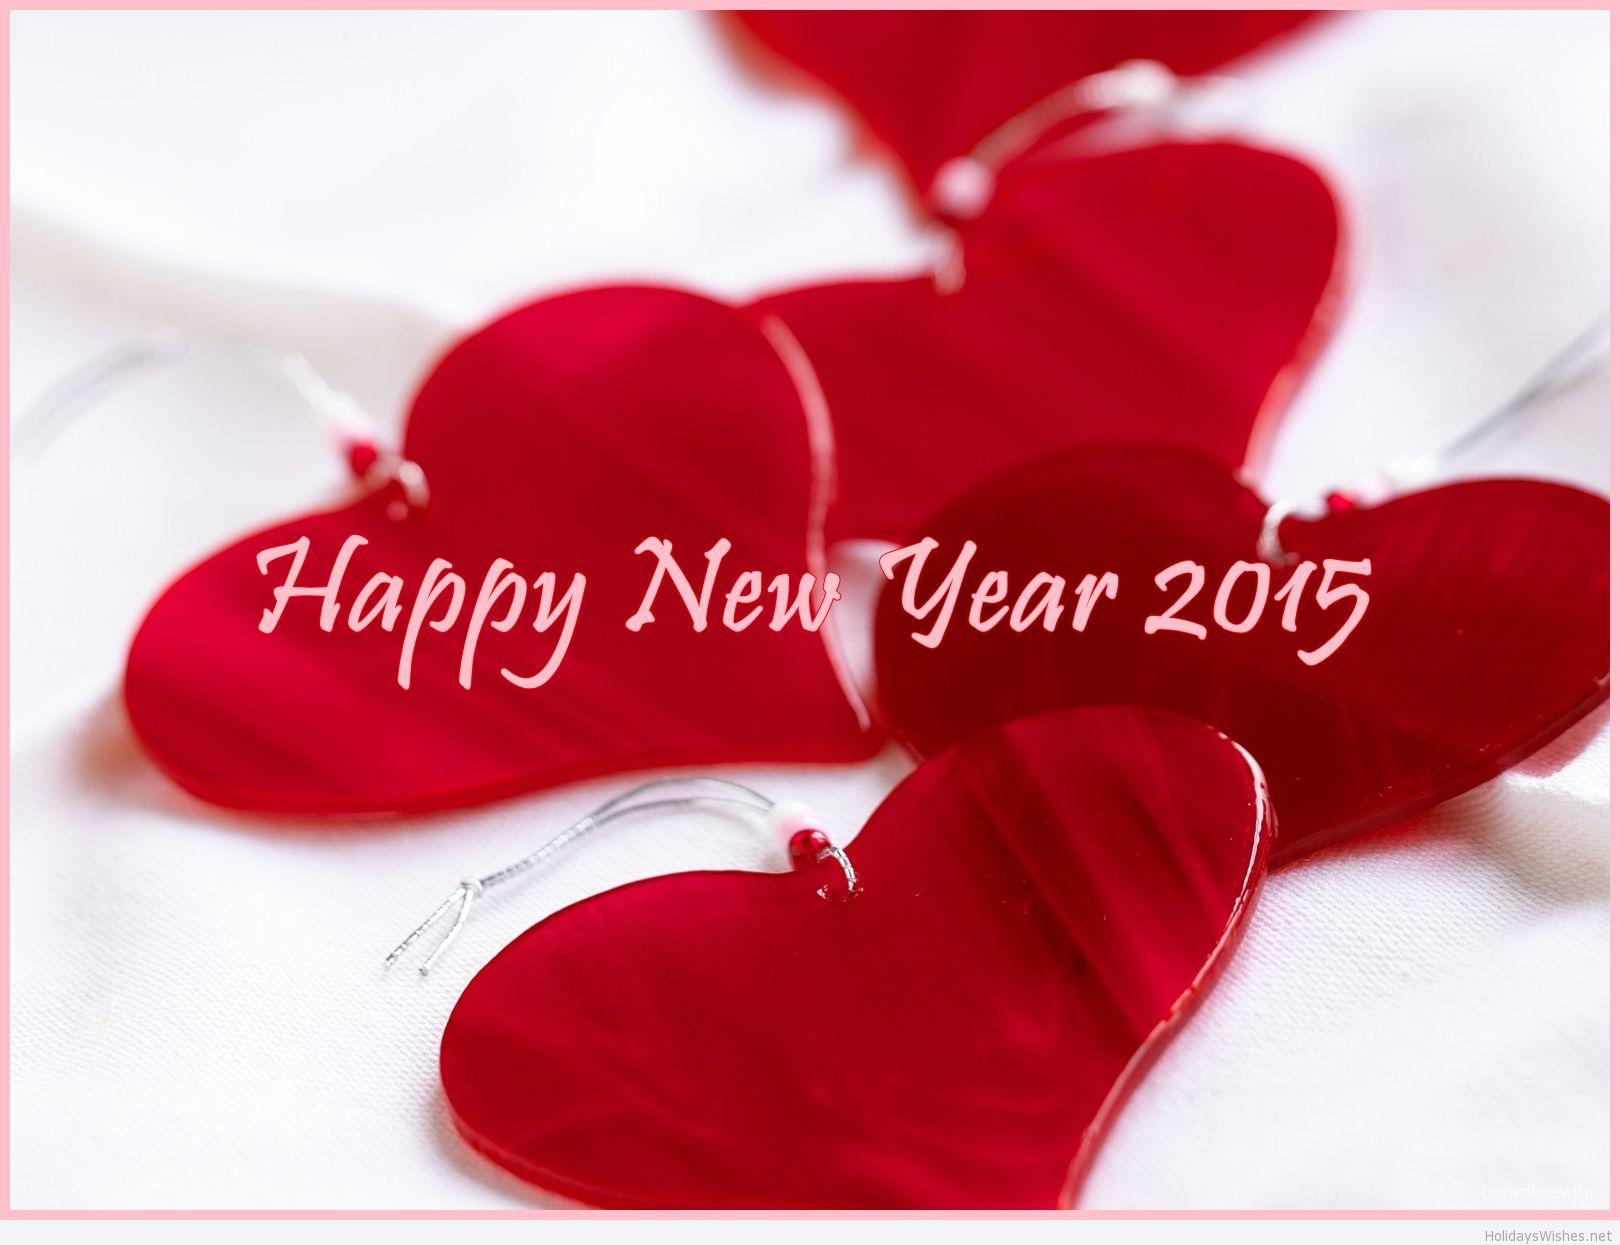 New Year romantic messages Image greetings cards